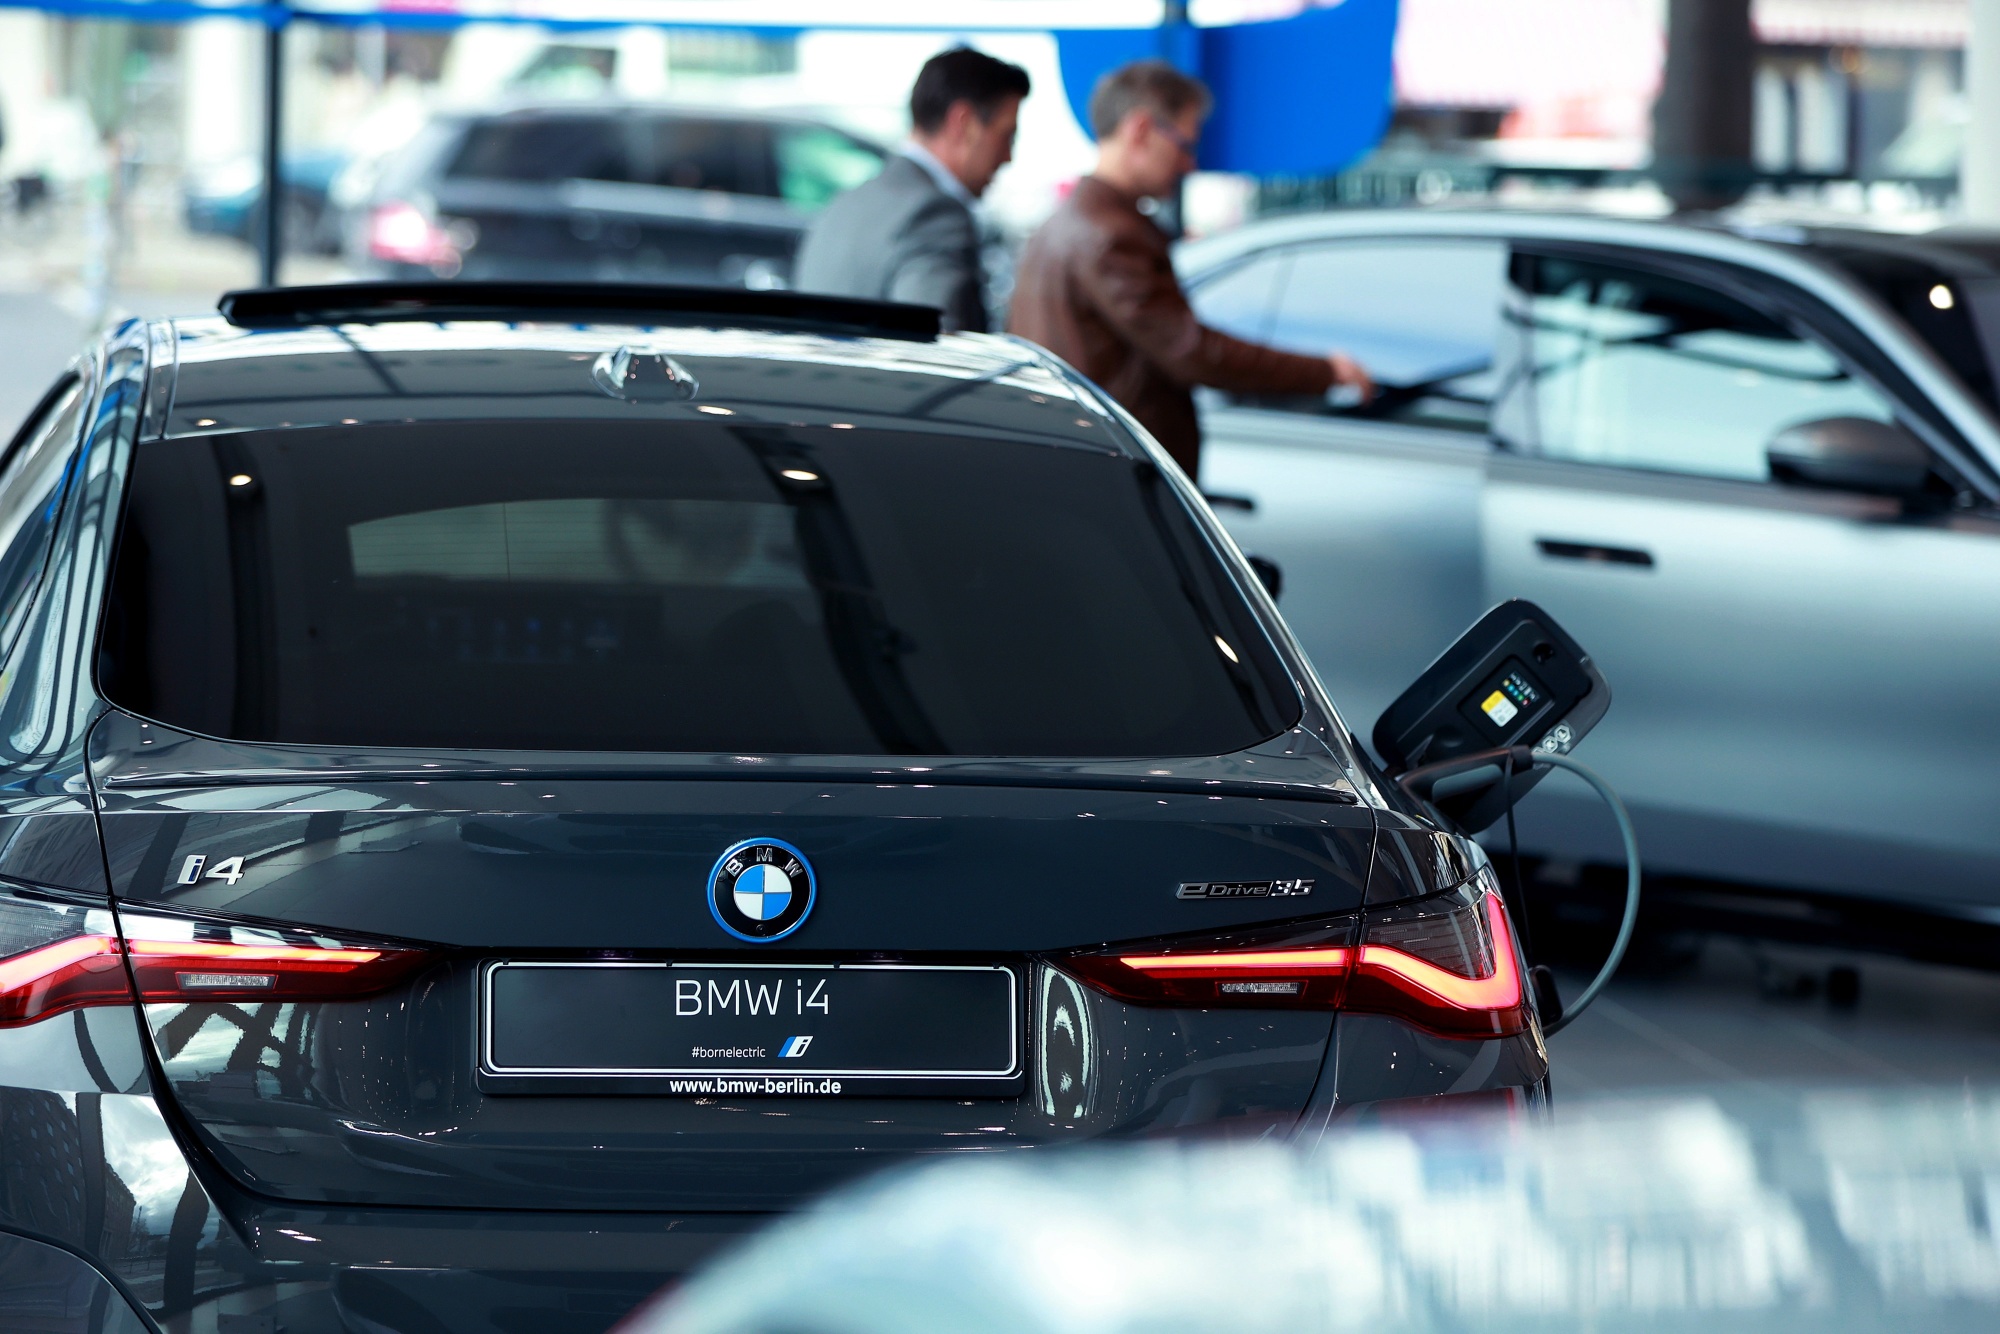 BMW ships cars without Apple, Google tech